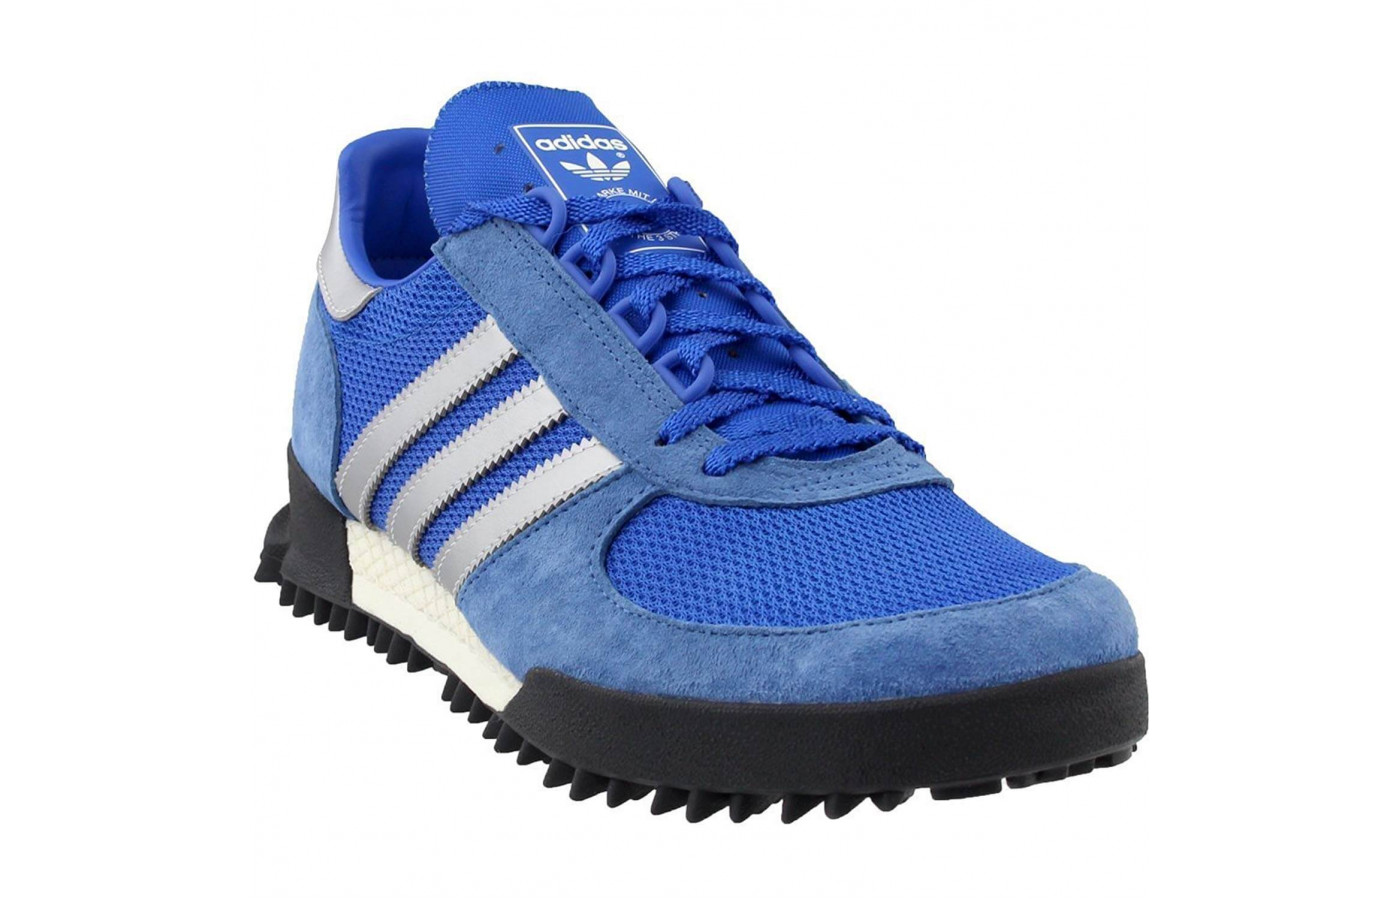 Rated & Reviewed TR Adidas RunnerClick Marathon |